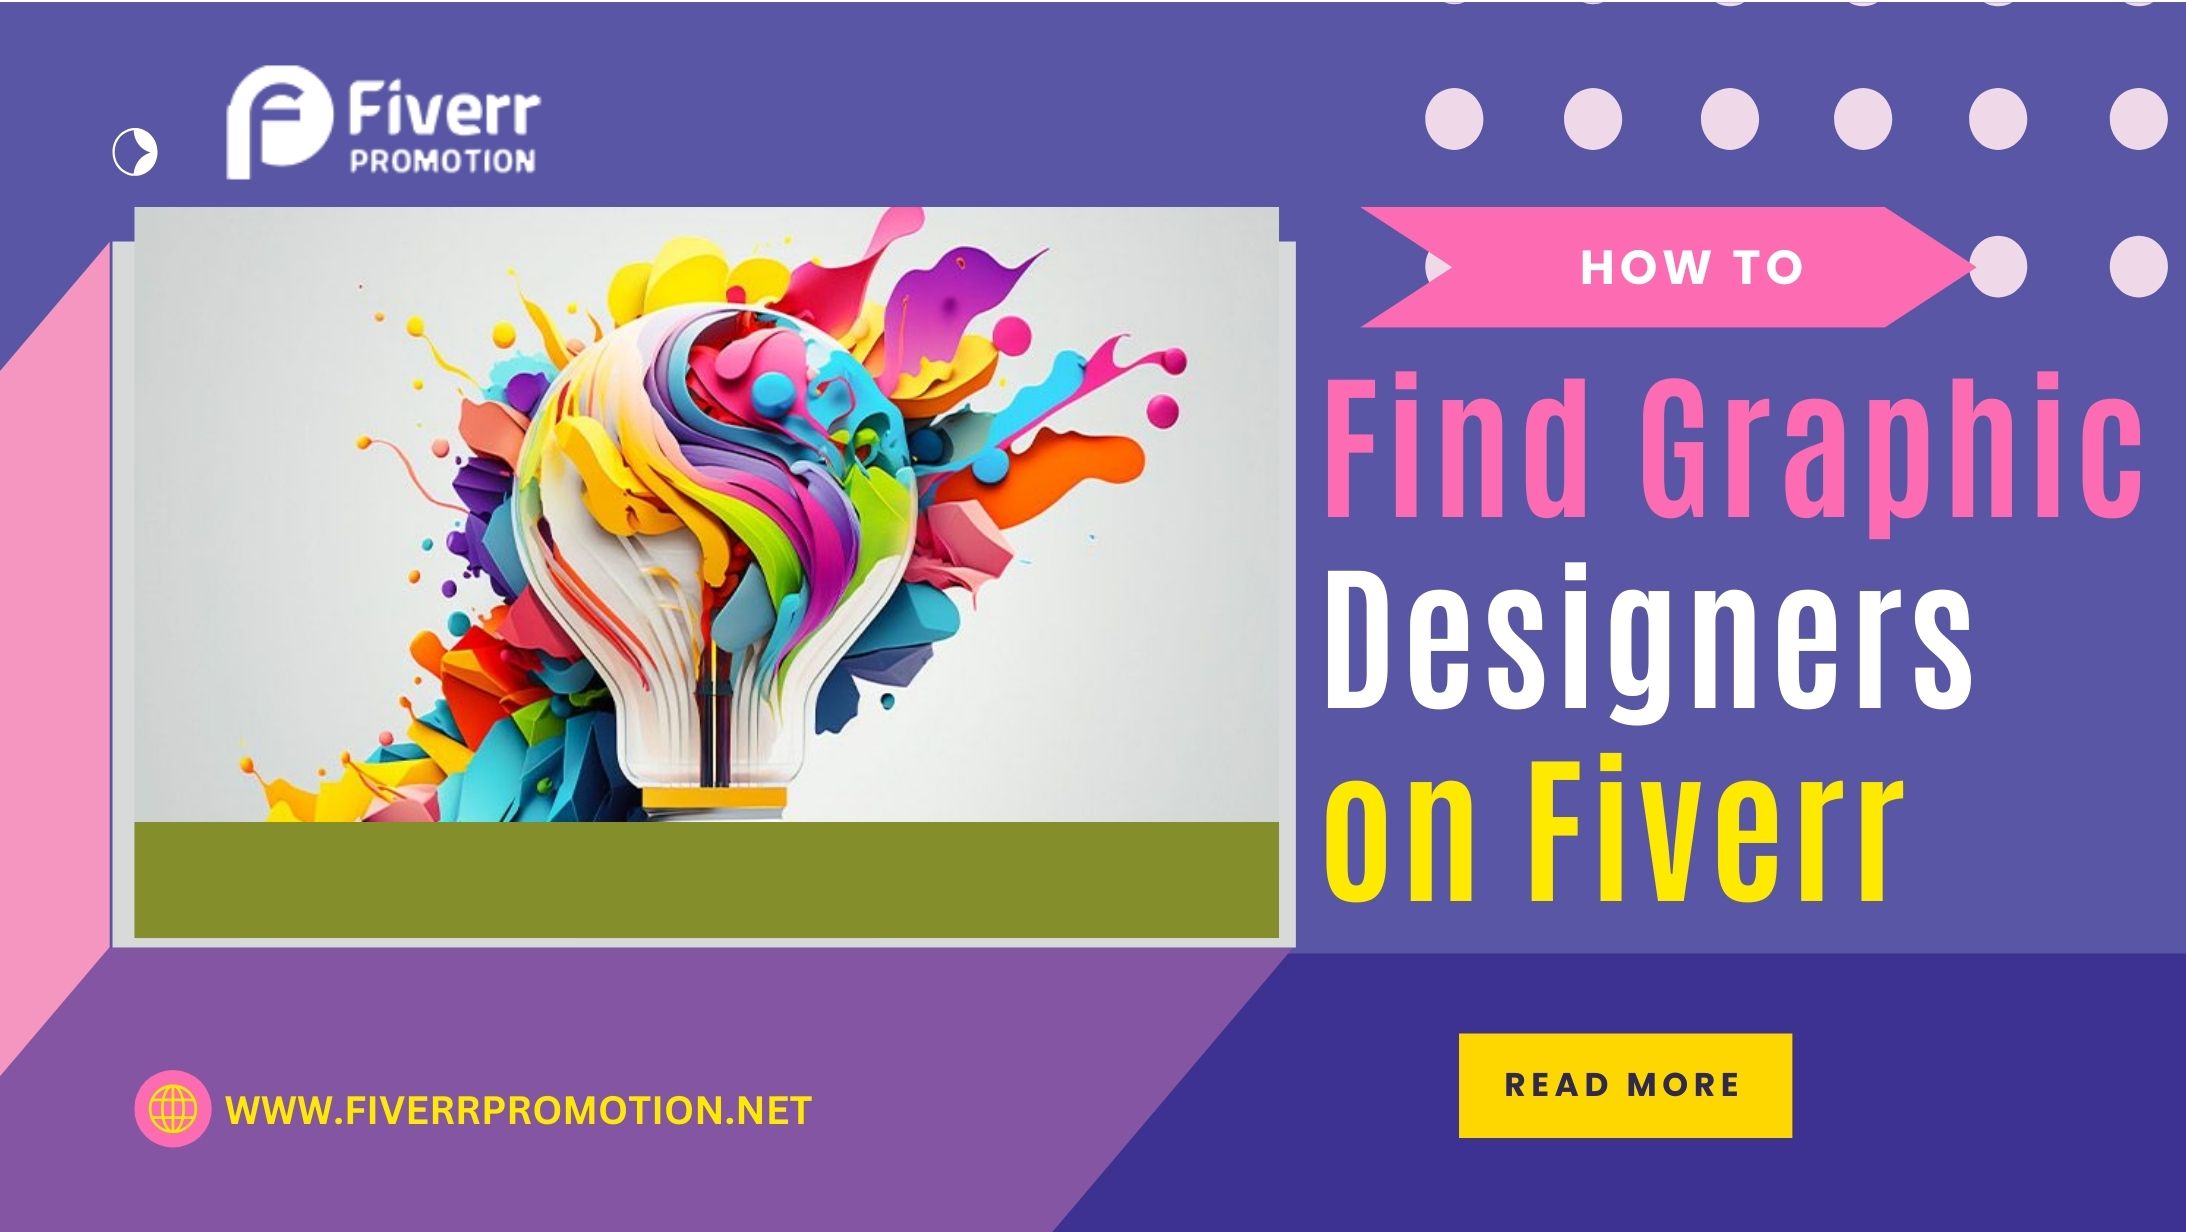 How to Find Graphic Designers on Fiverr